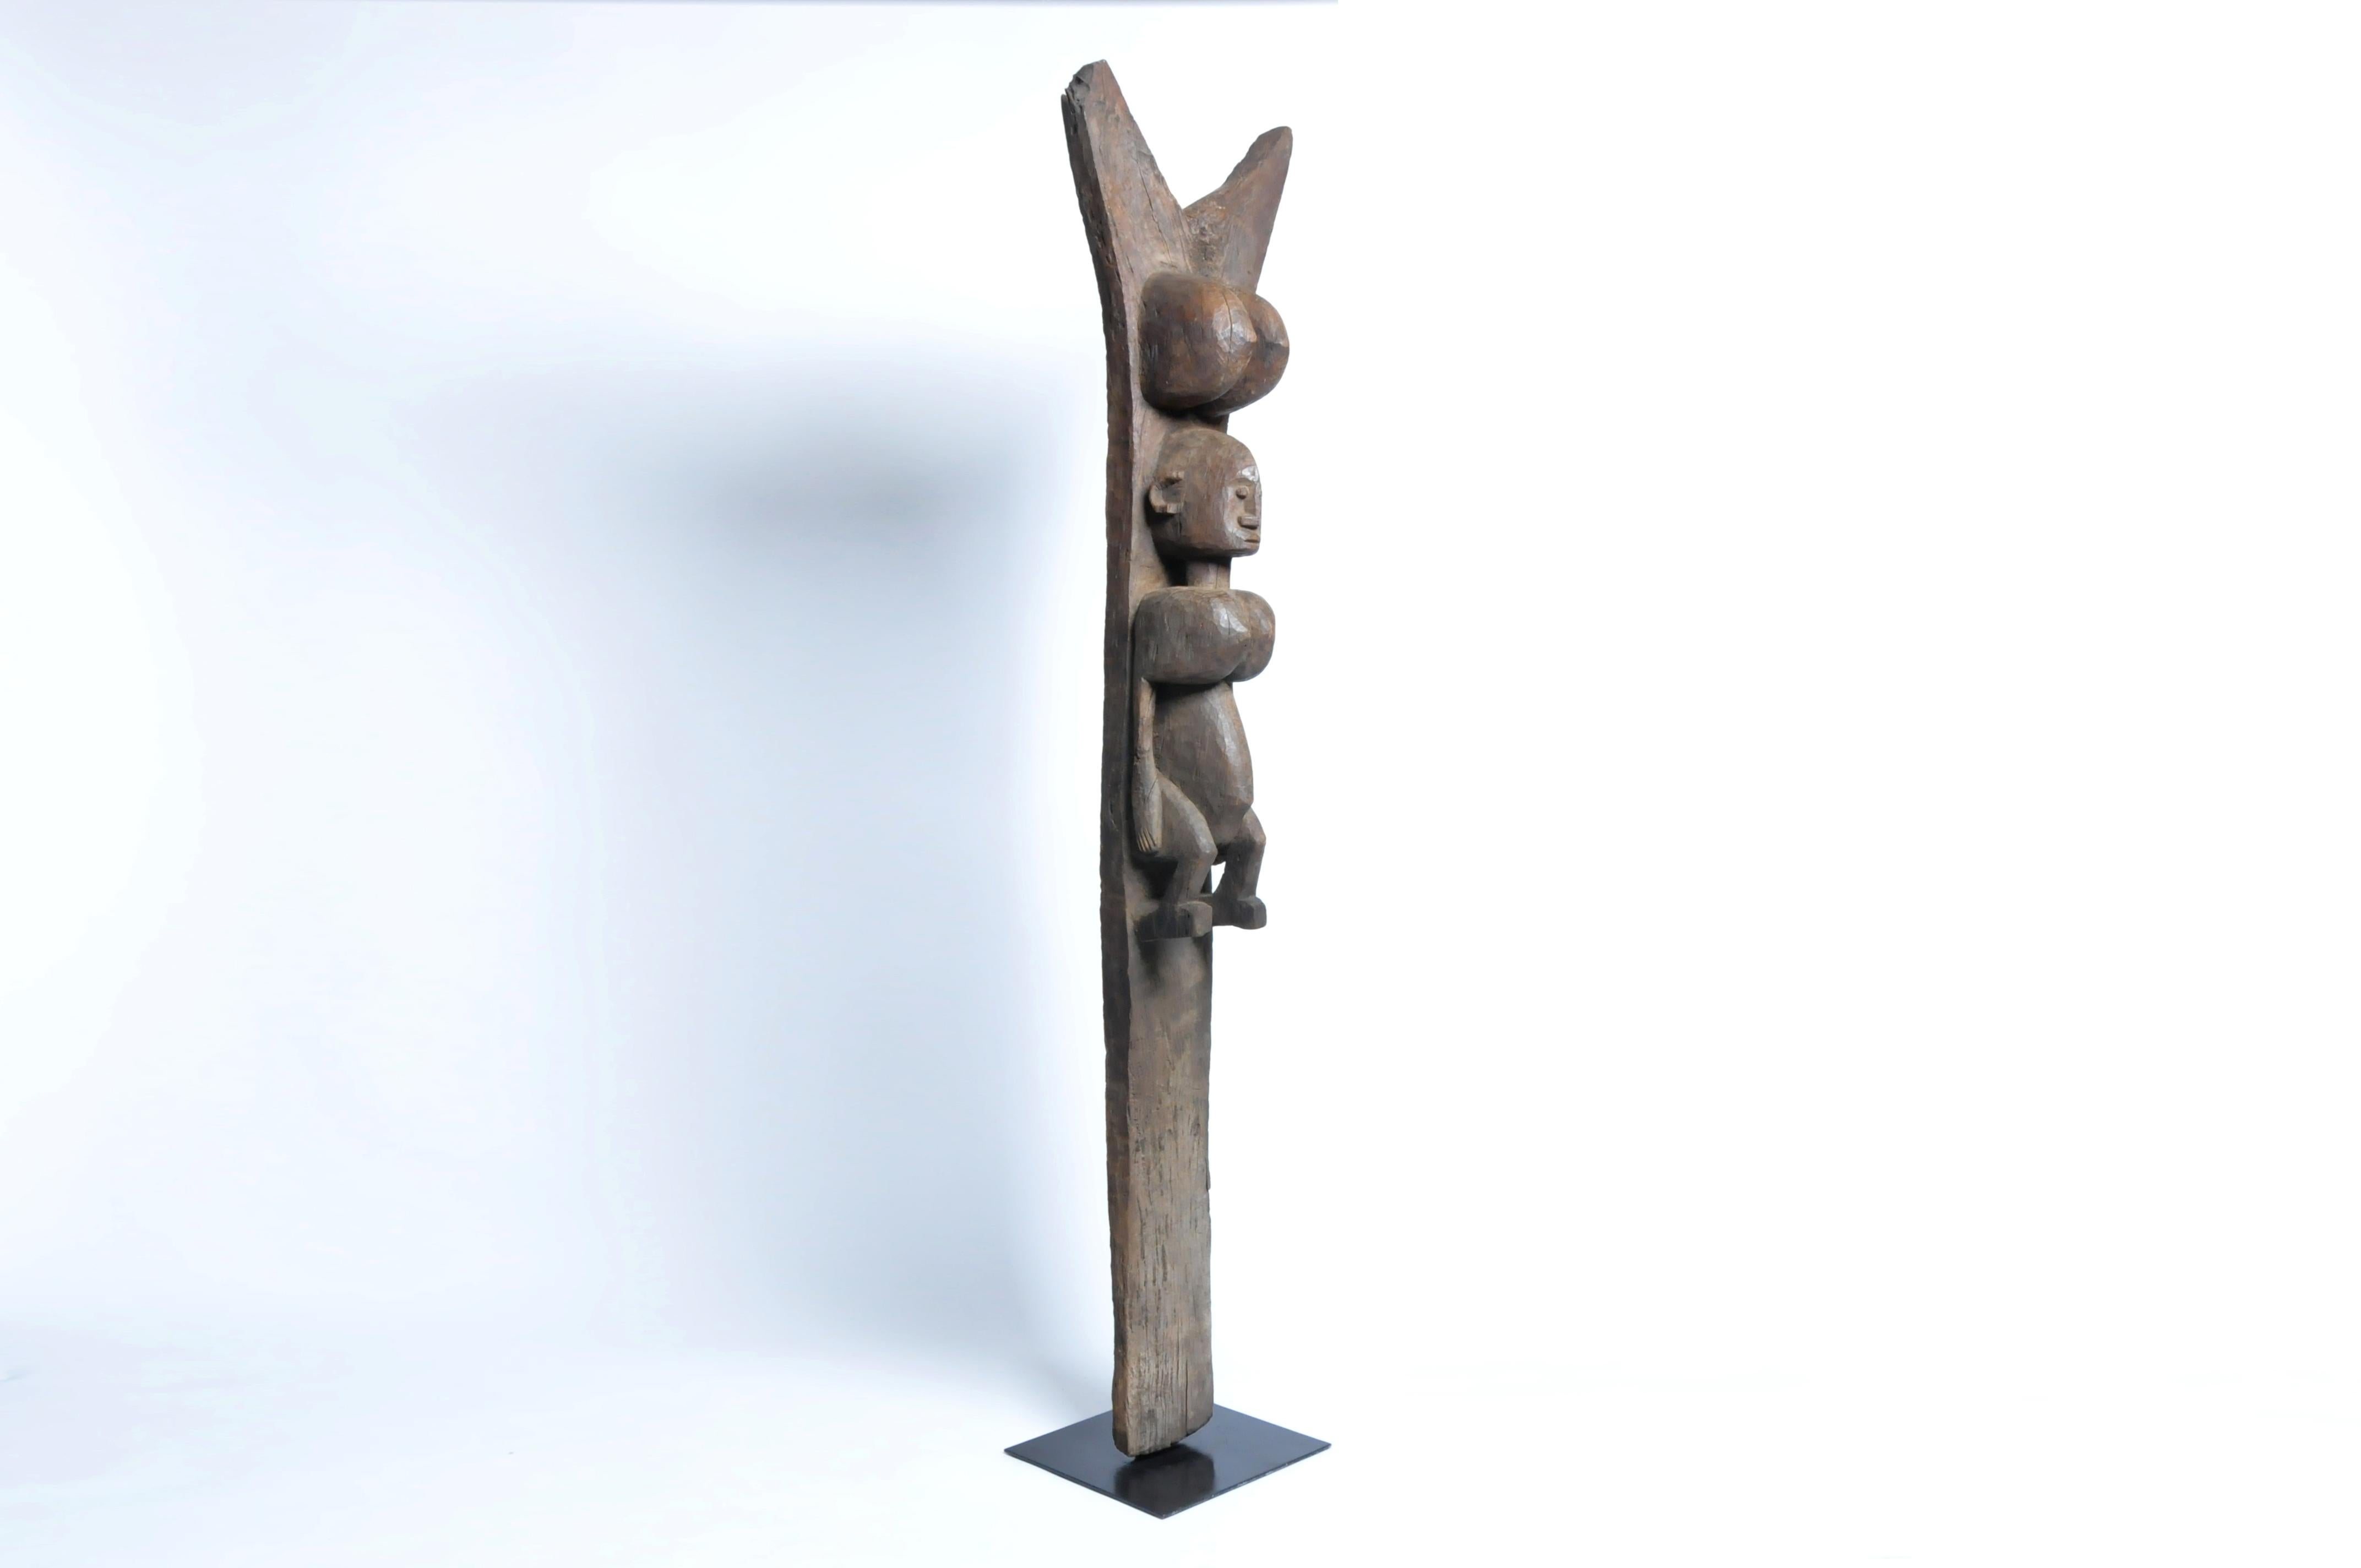 Bamana tribe art is known for masks, textiles and architectural elements. This Y-shaped post supported a heavy roof timber and acted as a welcoming symbol. Bamana and Dogon building posts are very similar but fewer Bamana pieces remain. This post